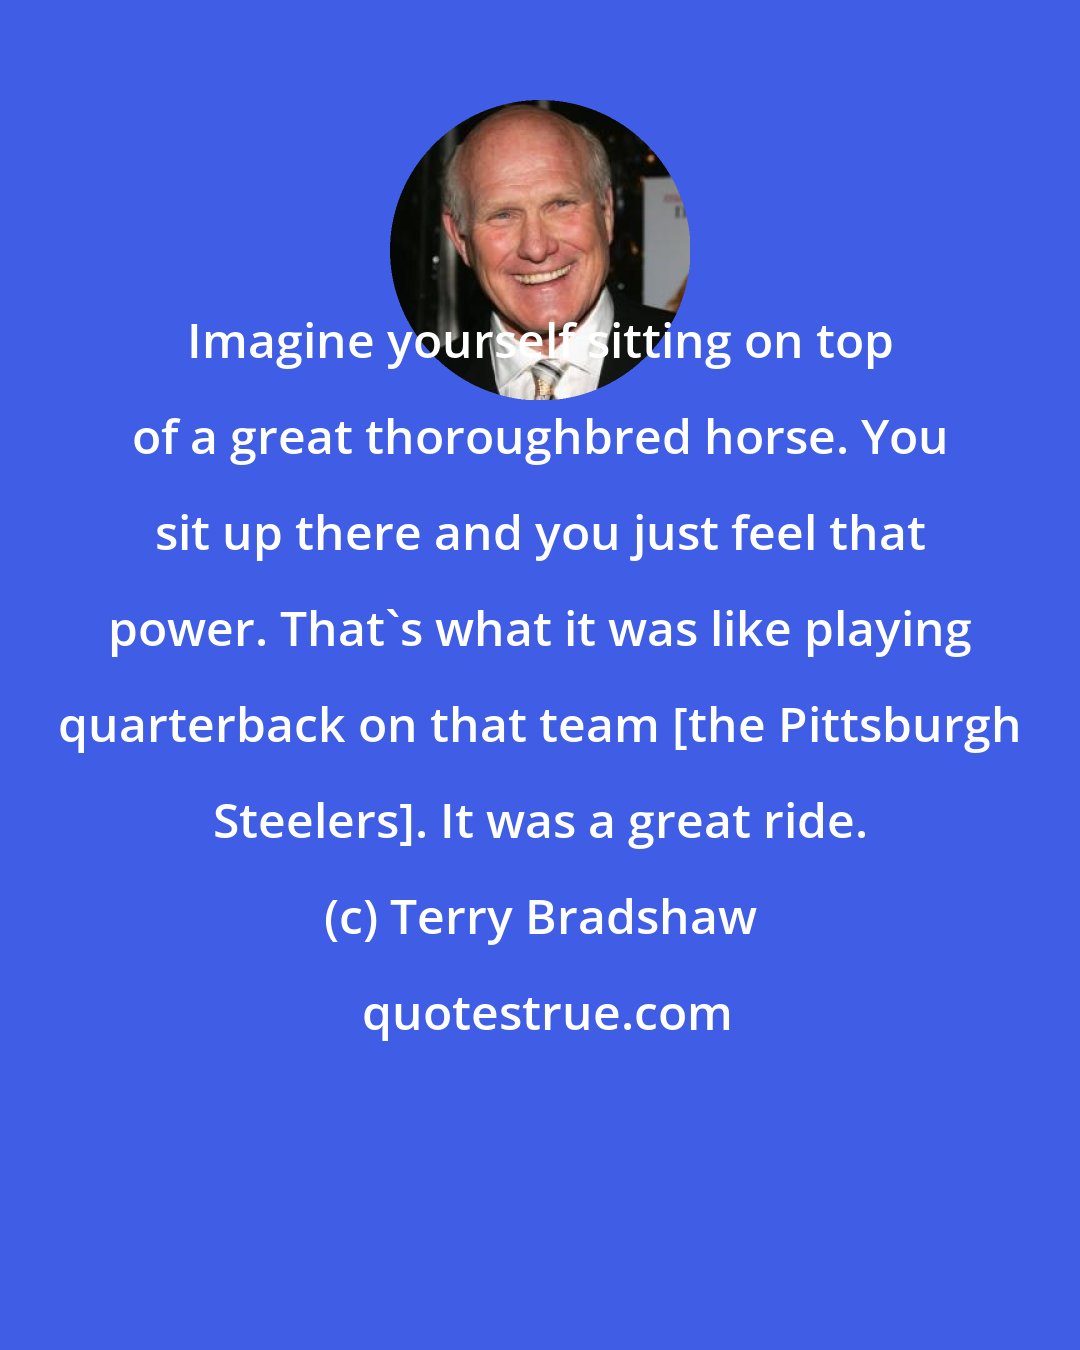 Terry Bradshaw: Imagine yourself sitting on top of a great thoroughbred horse. You sit up there and you just feel that power. That's what it was like playing quarterback on that team [the Pittsburgh Steelers]. It was a great ride.